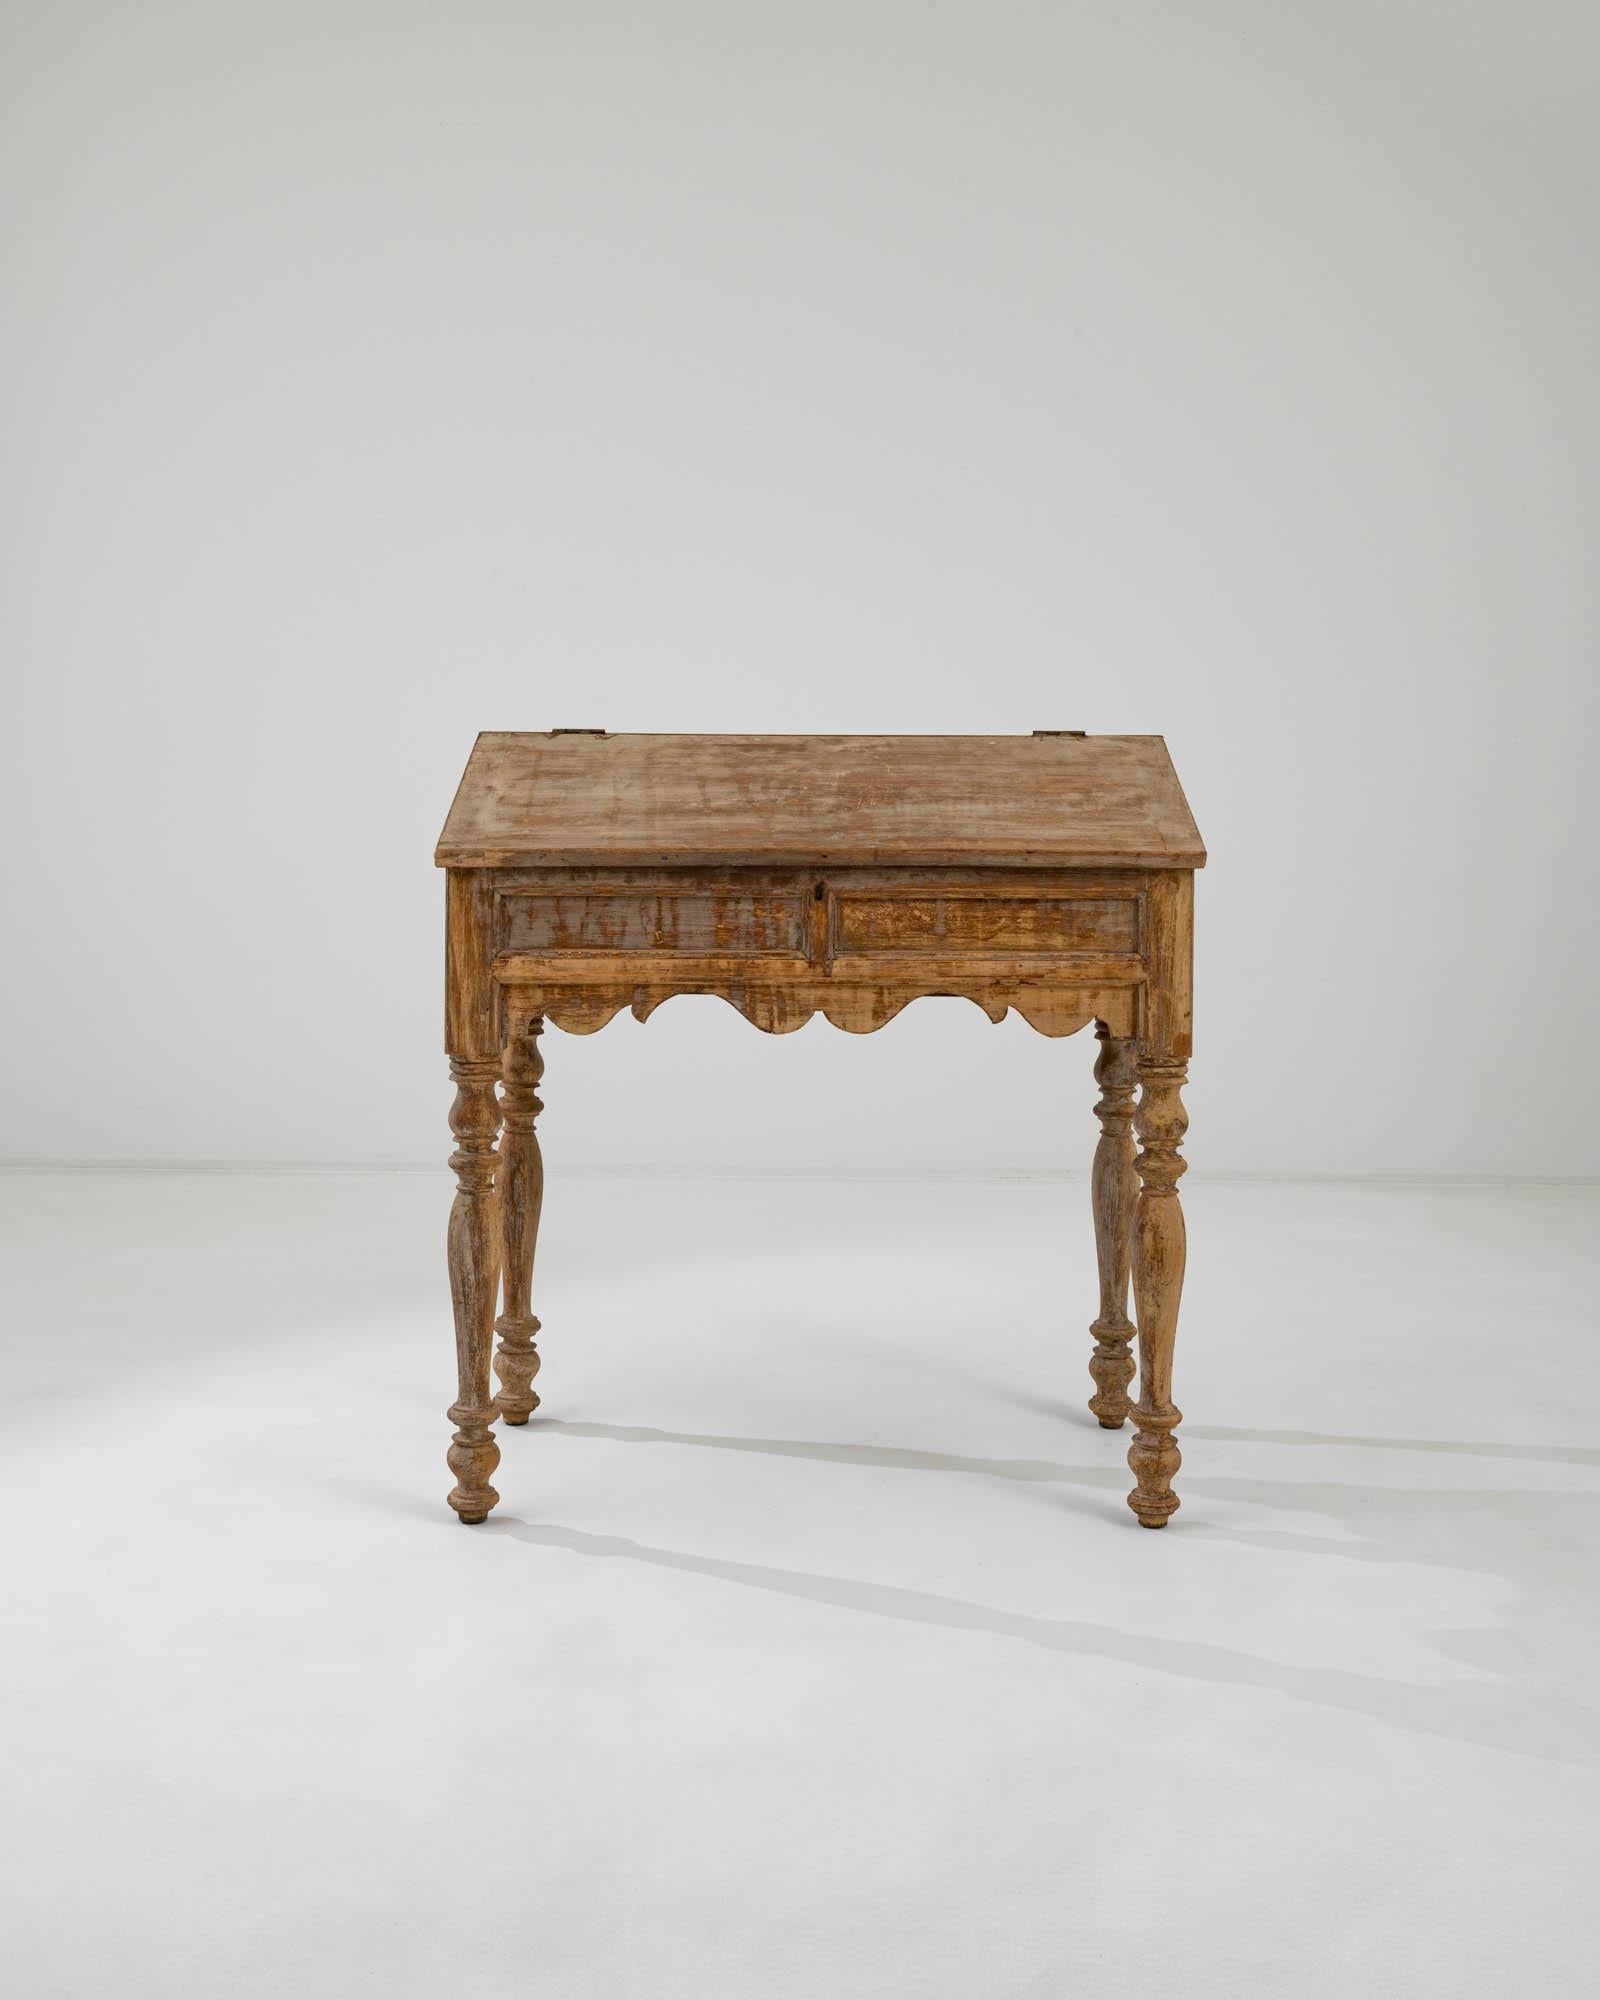 A wooden desk created in 19th century France. Dignified and glowing golden, this classical writing desk oozes a one of a kind beauty and sense of history. Sumptuously scalloped aprons and lathed legs engender a feeling of loving craft and a level of